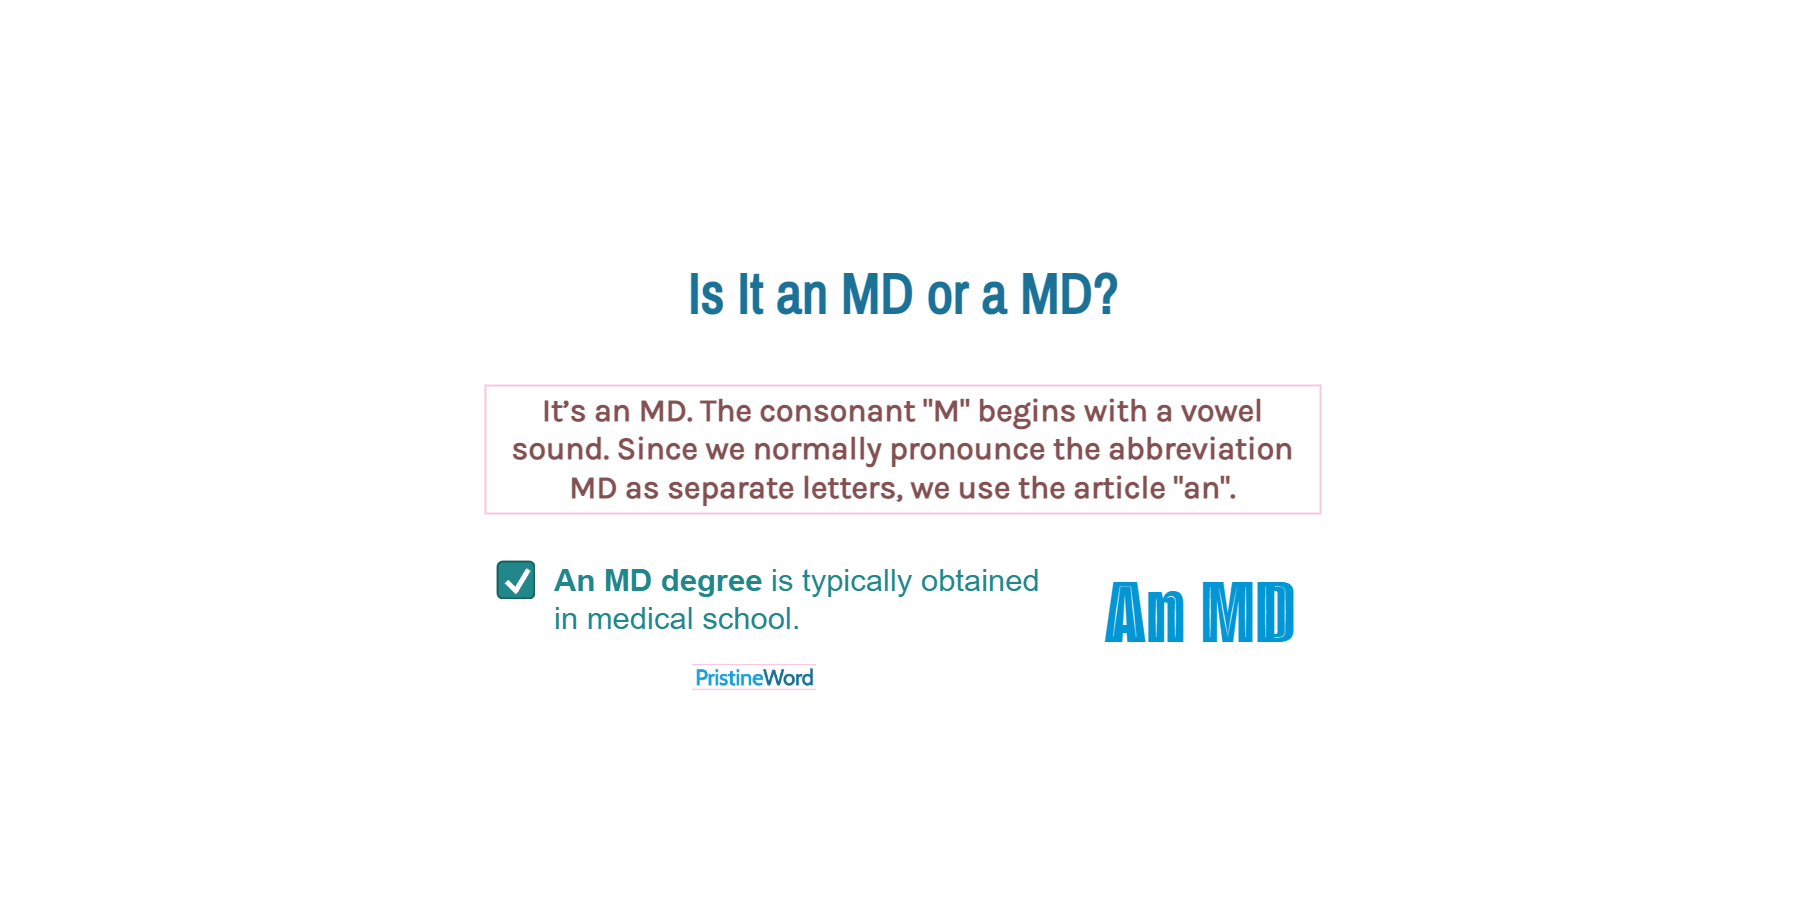 Is It an MD or a MD?